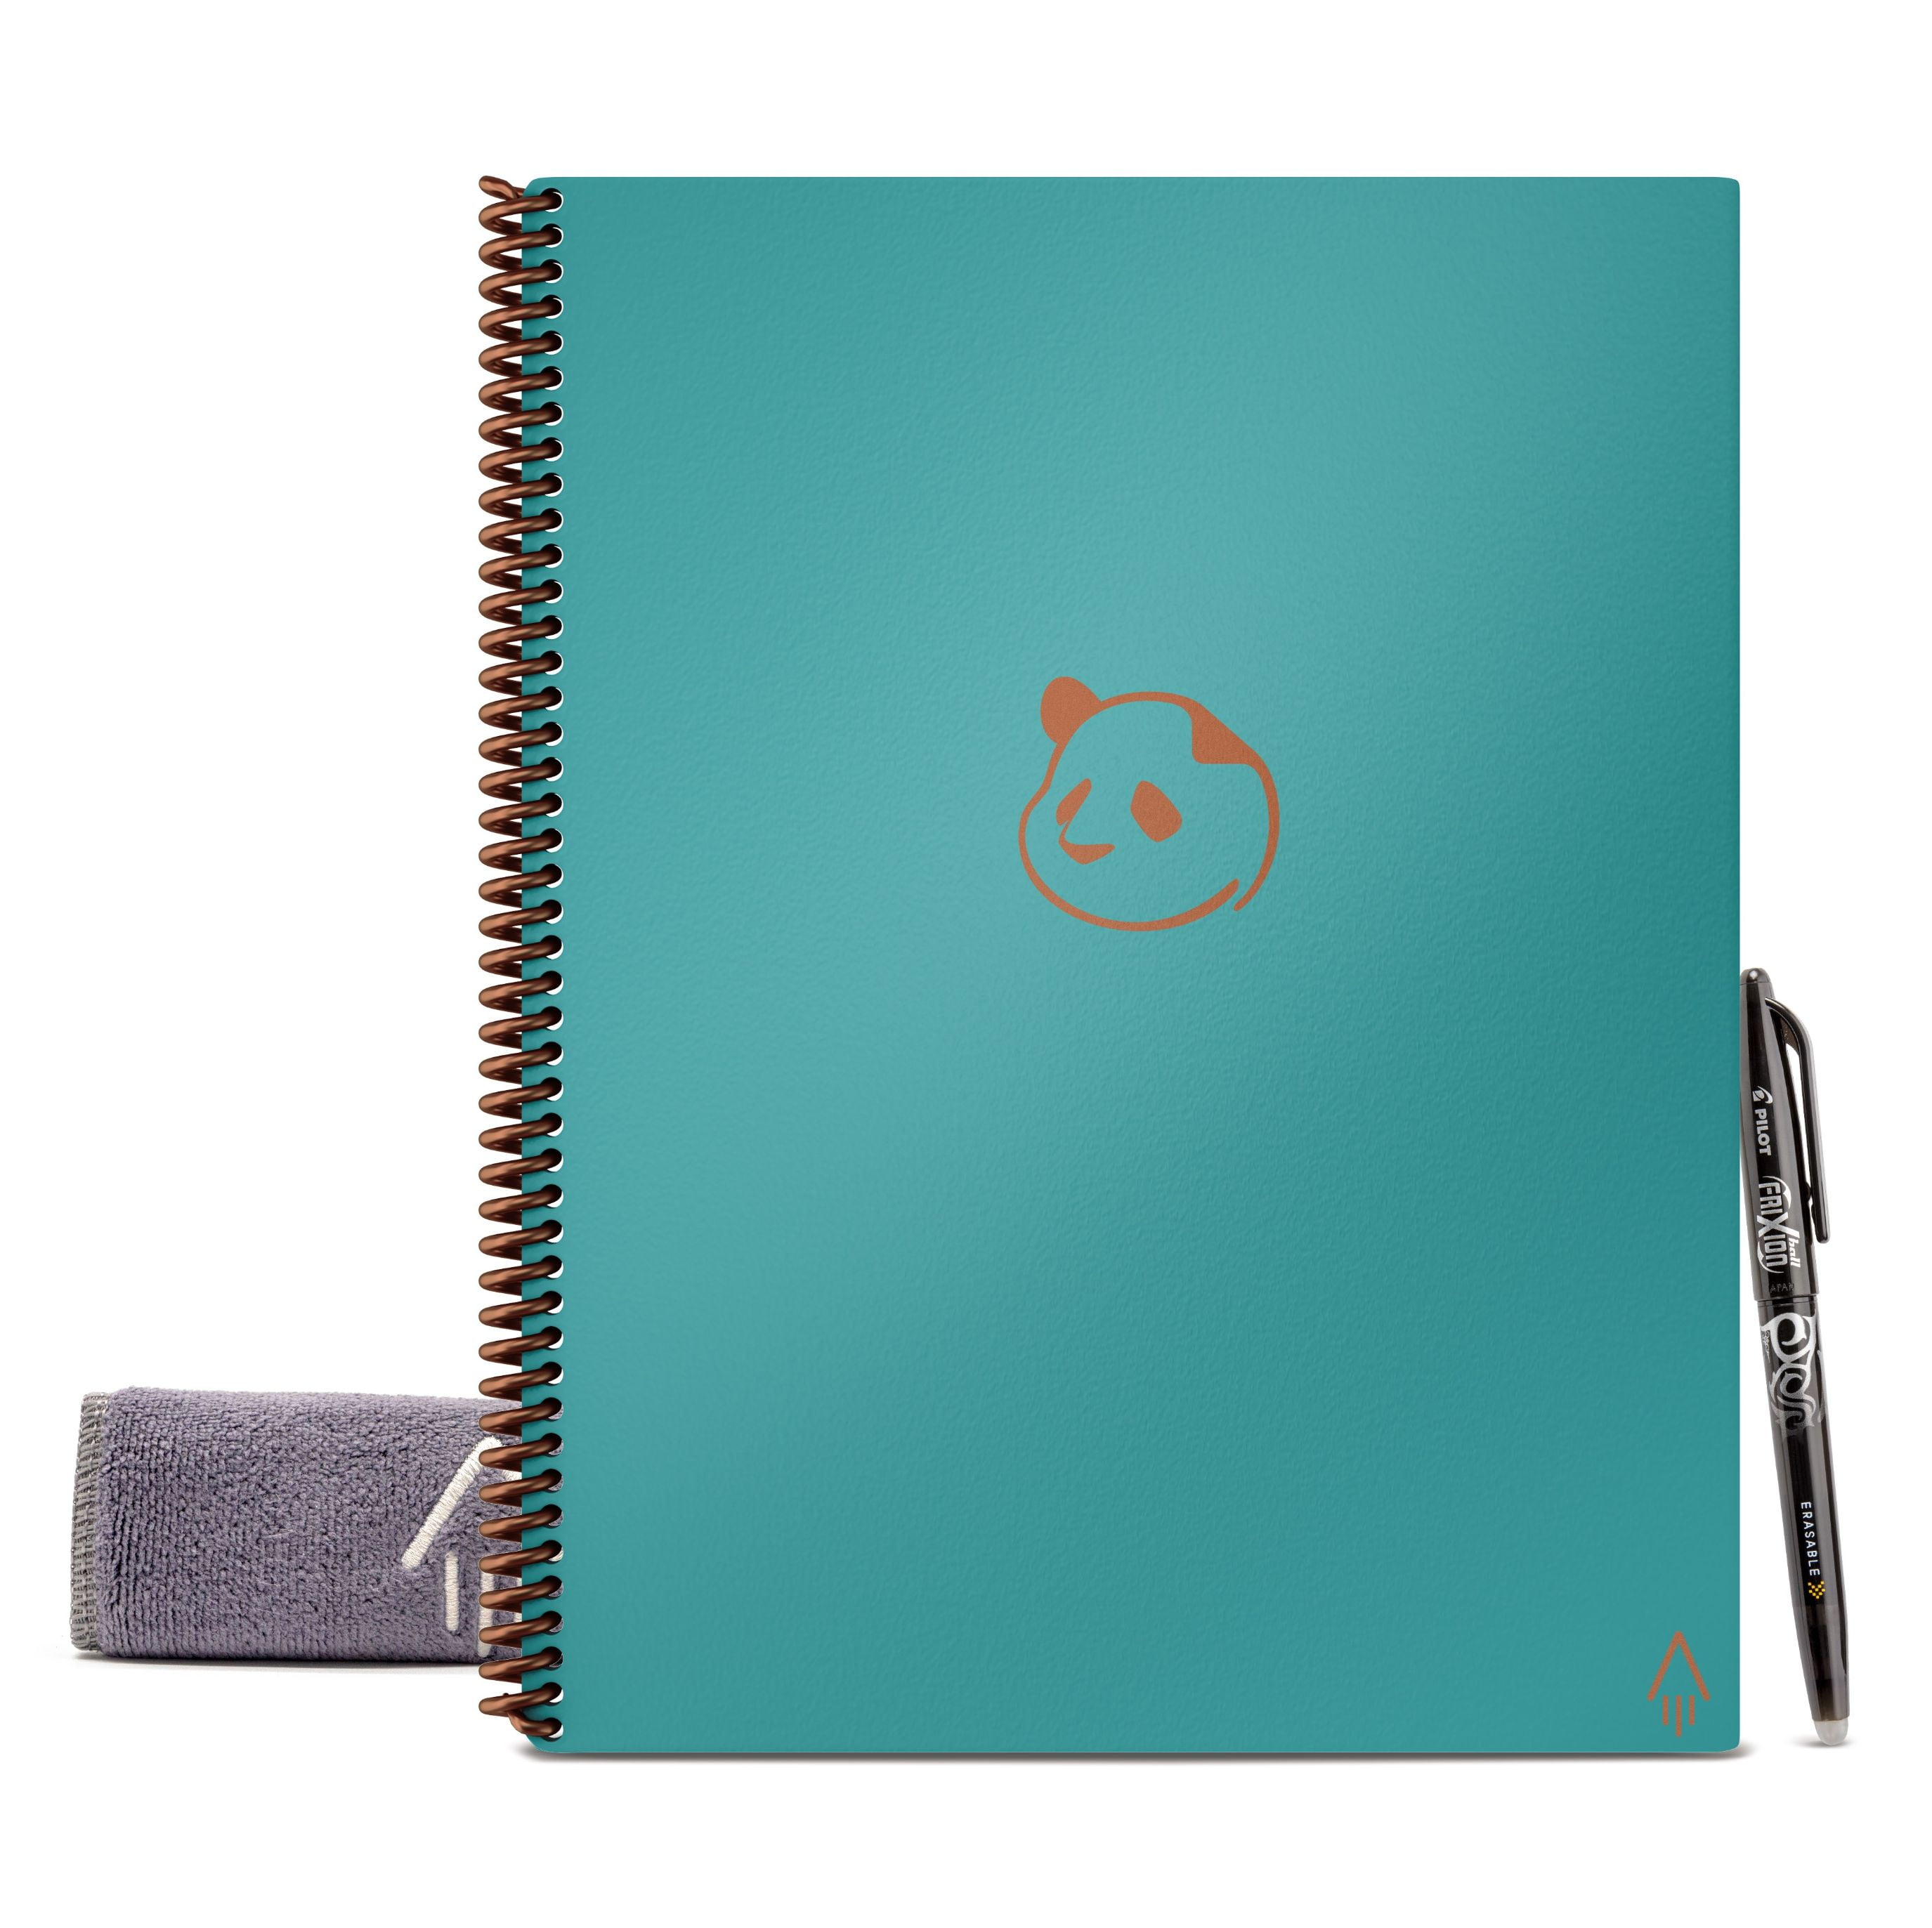 Rocketbook Reusable Smart Panda Planner, Undated - Teal - Letter Size  Eco-friendly Notebook (8.5 x 11)